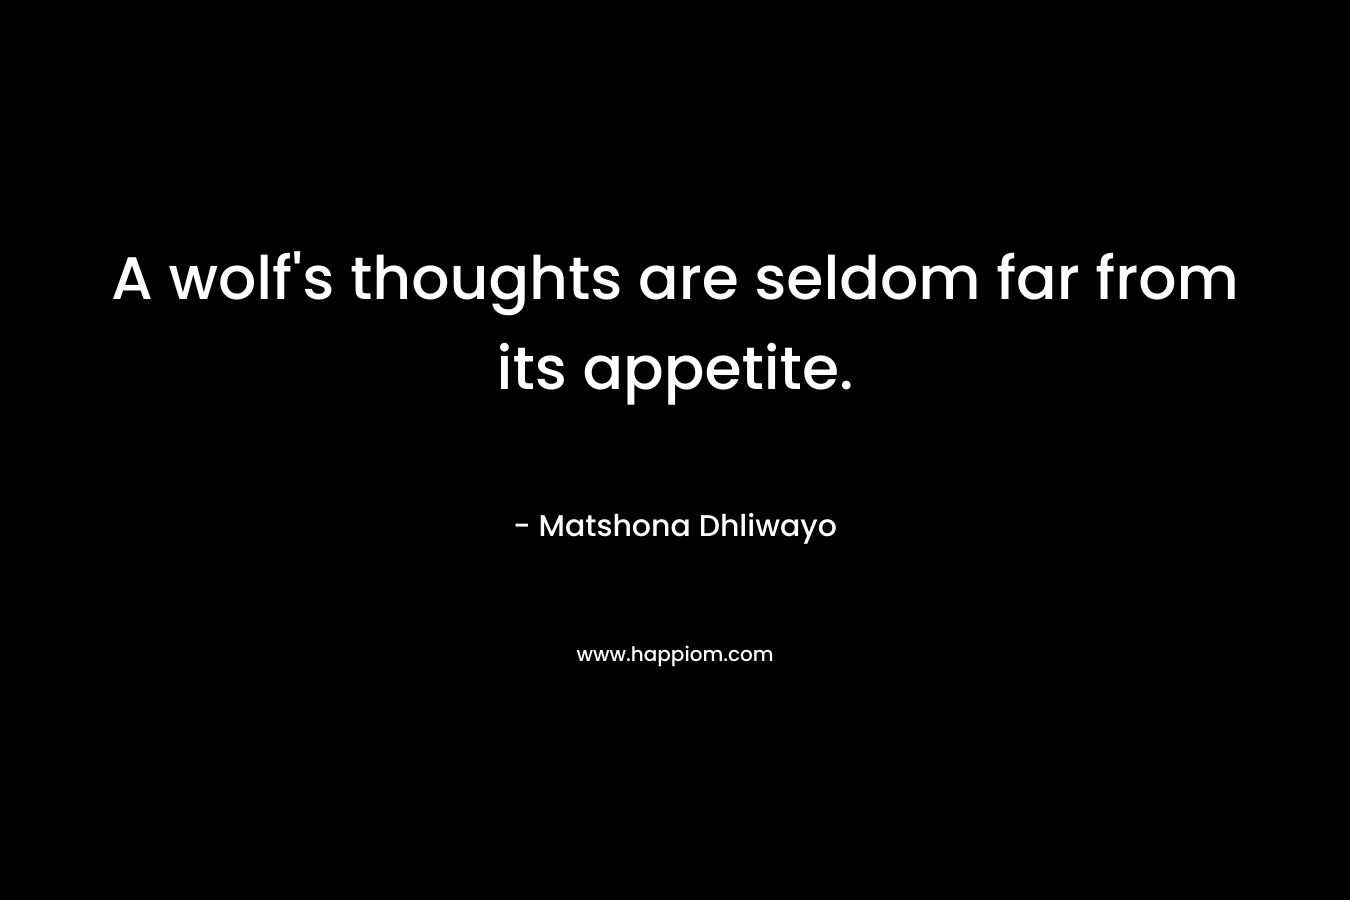 A wolf's thoughts are seldom far from its appetite.